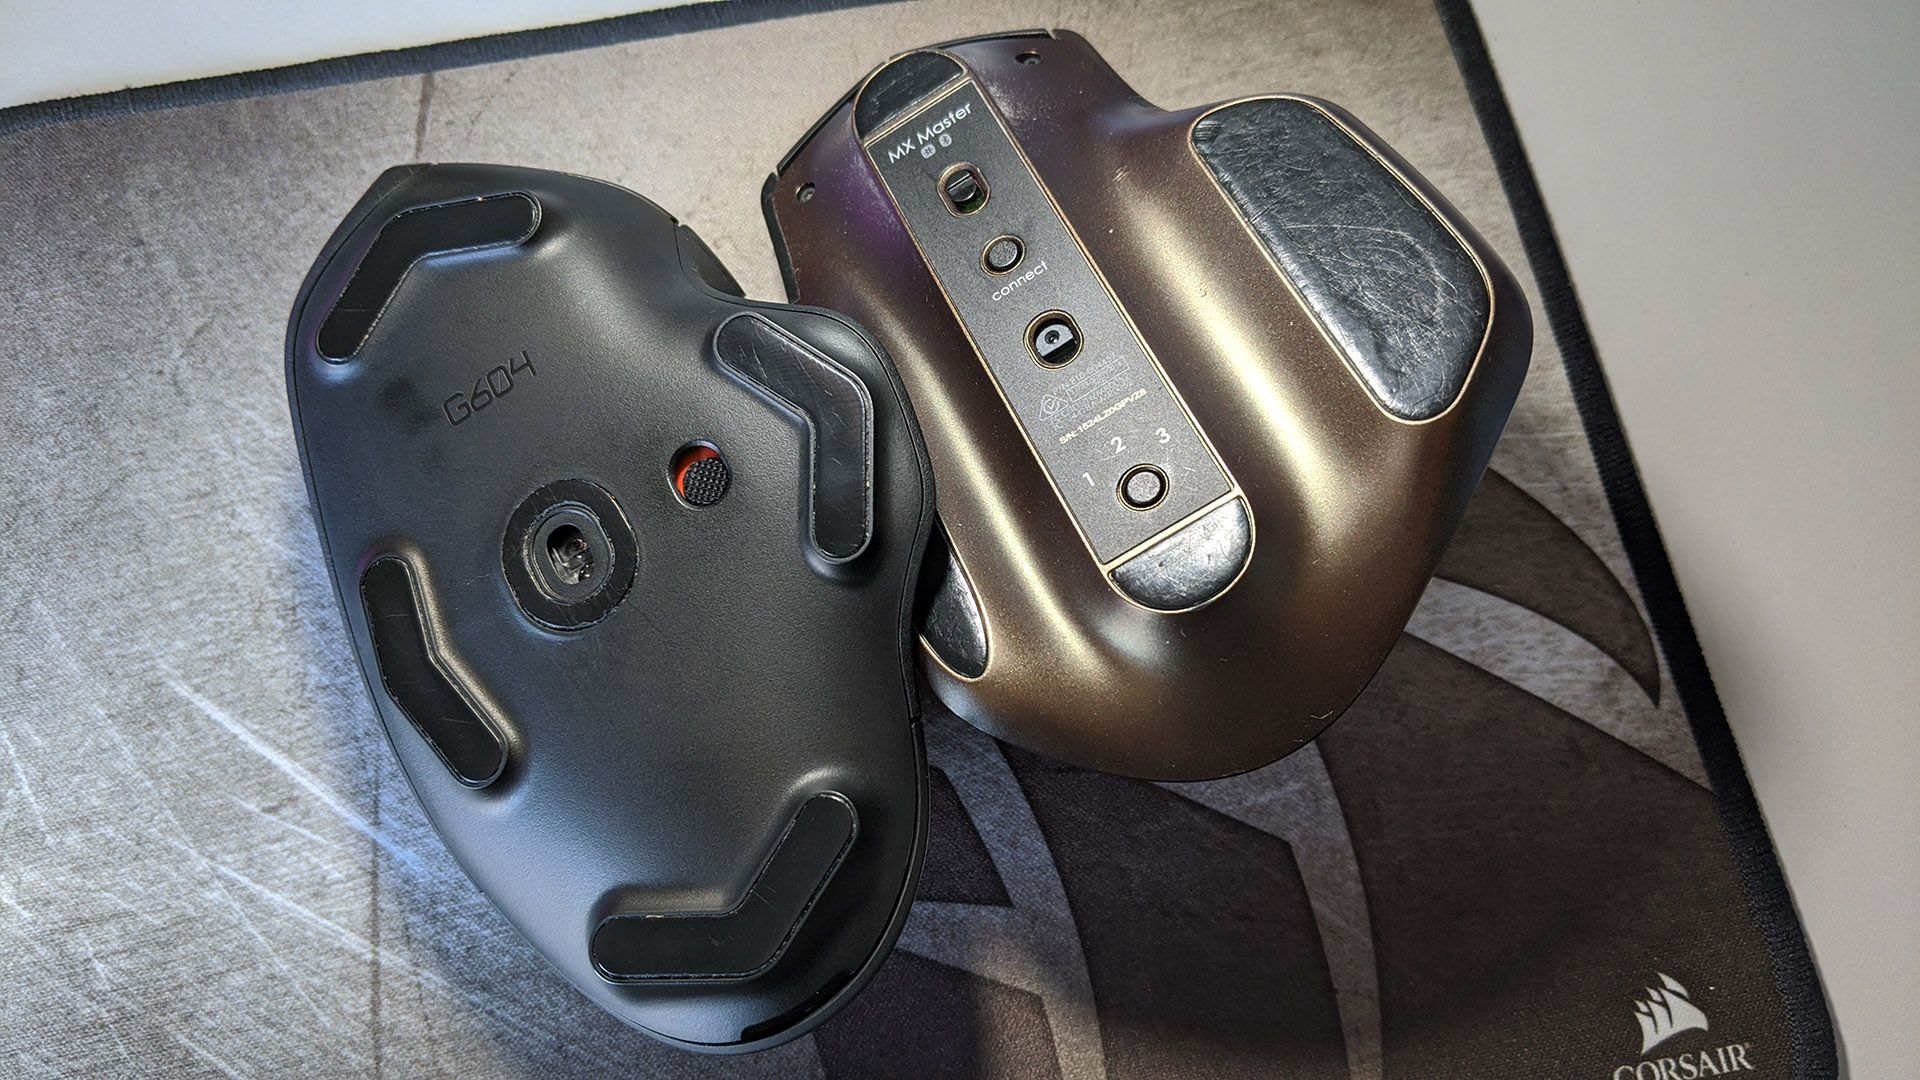 Two computer mice, upside down, with one worn and one clean.